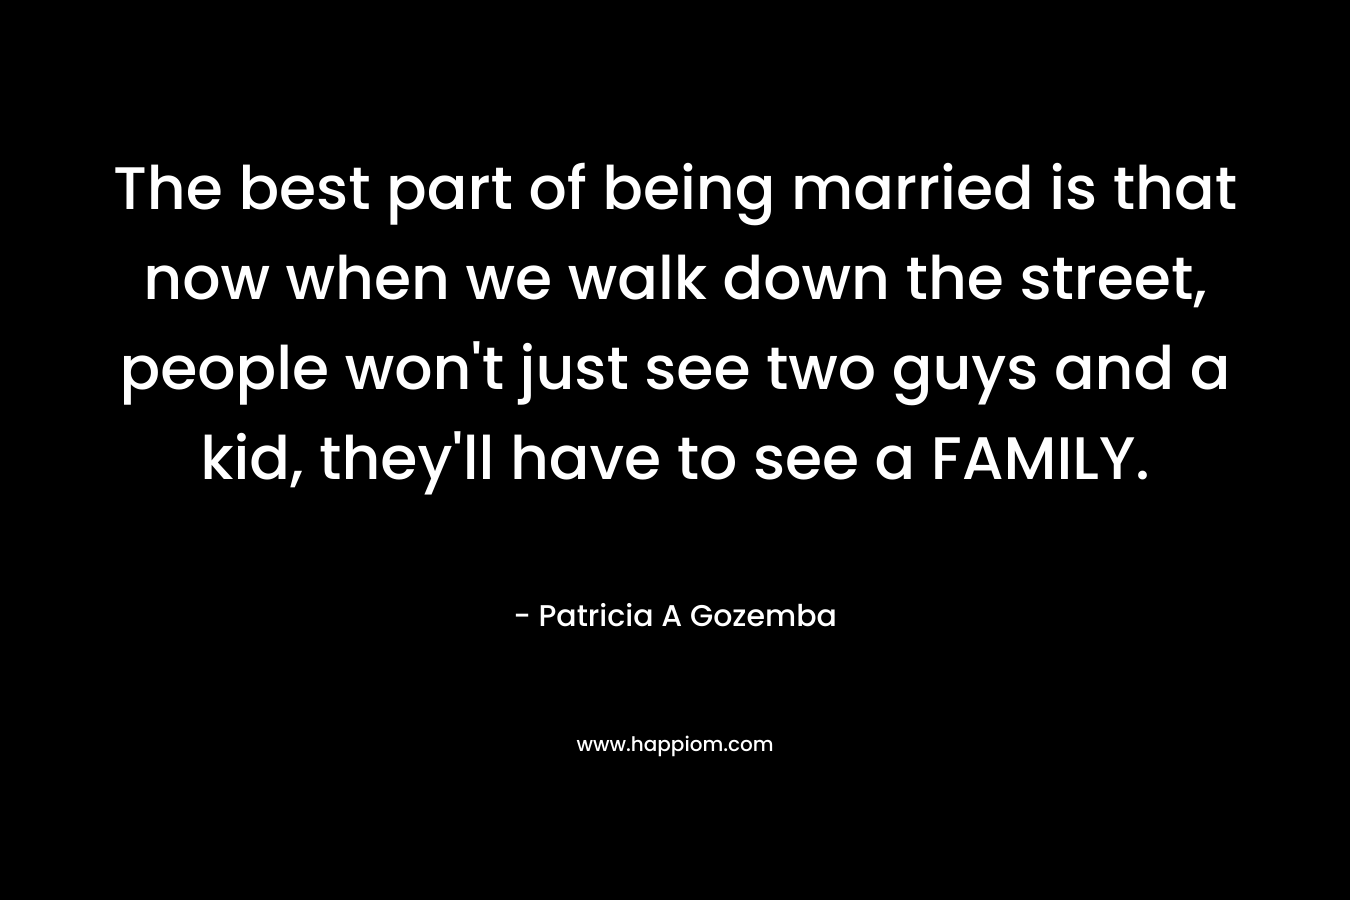 The best part of being married is that now when we walk down the street, people won't just see two guys and a kid, they'll have to see a FAMILY.